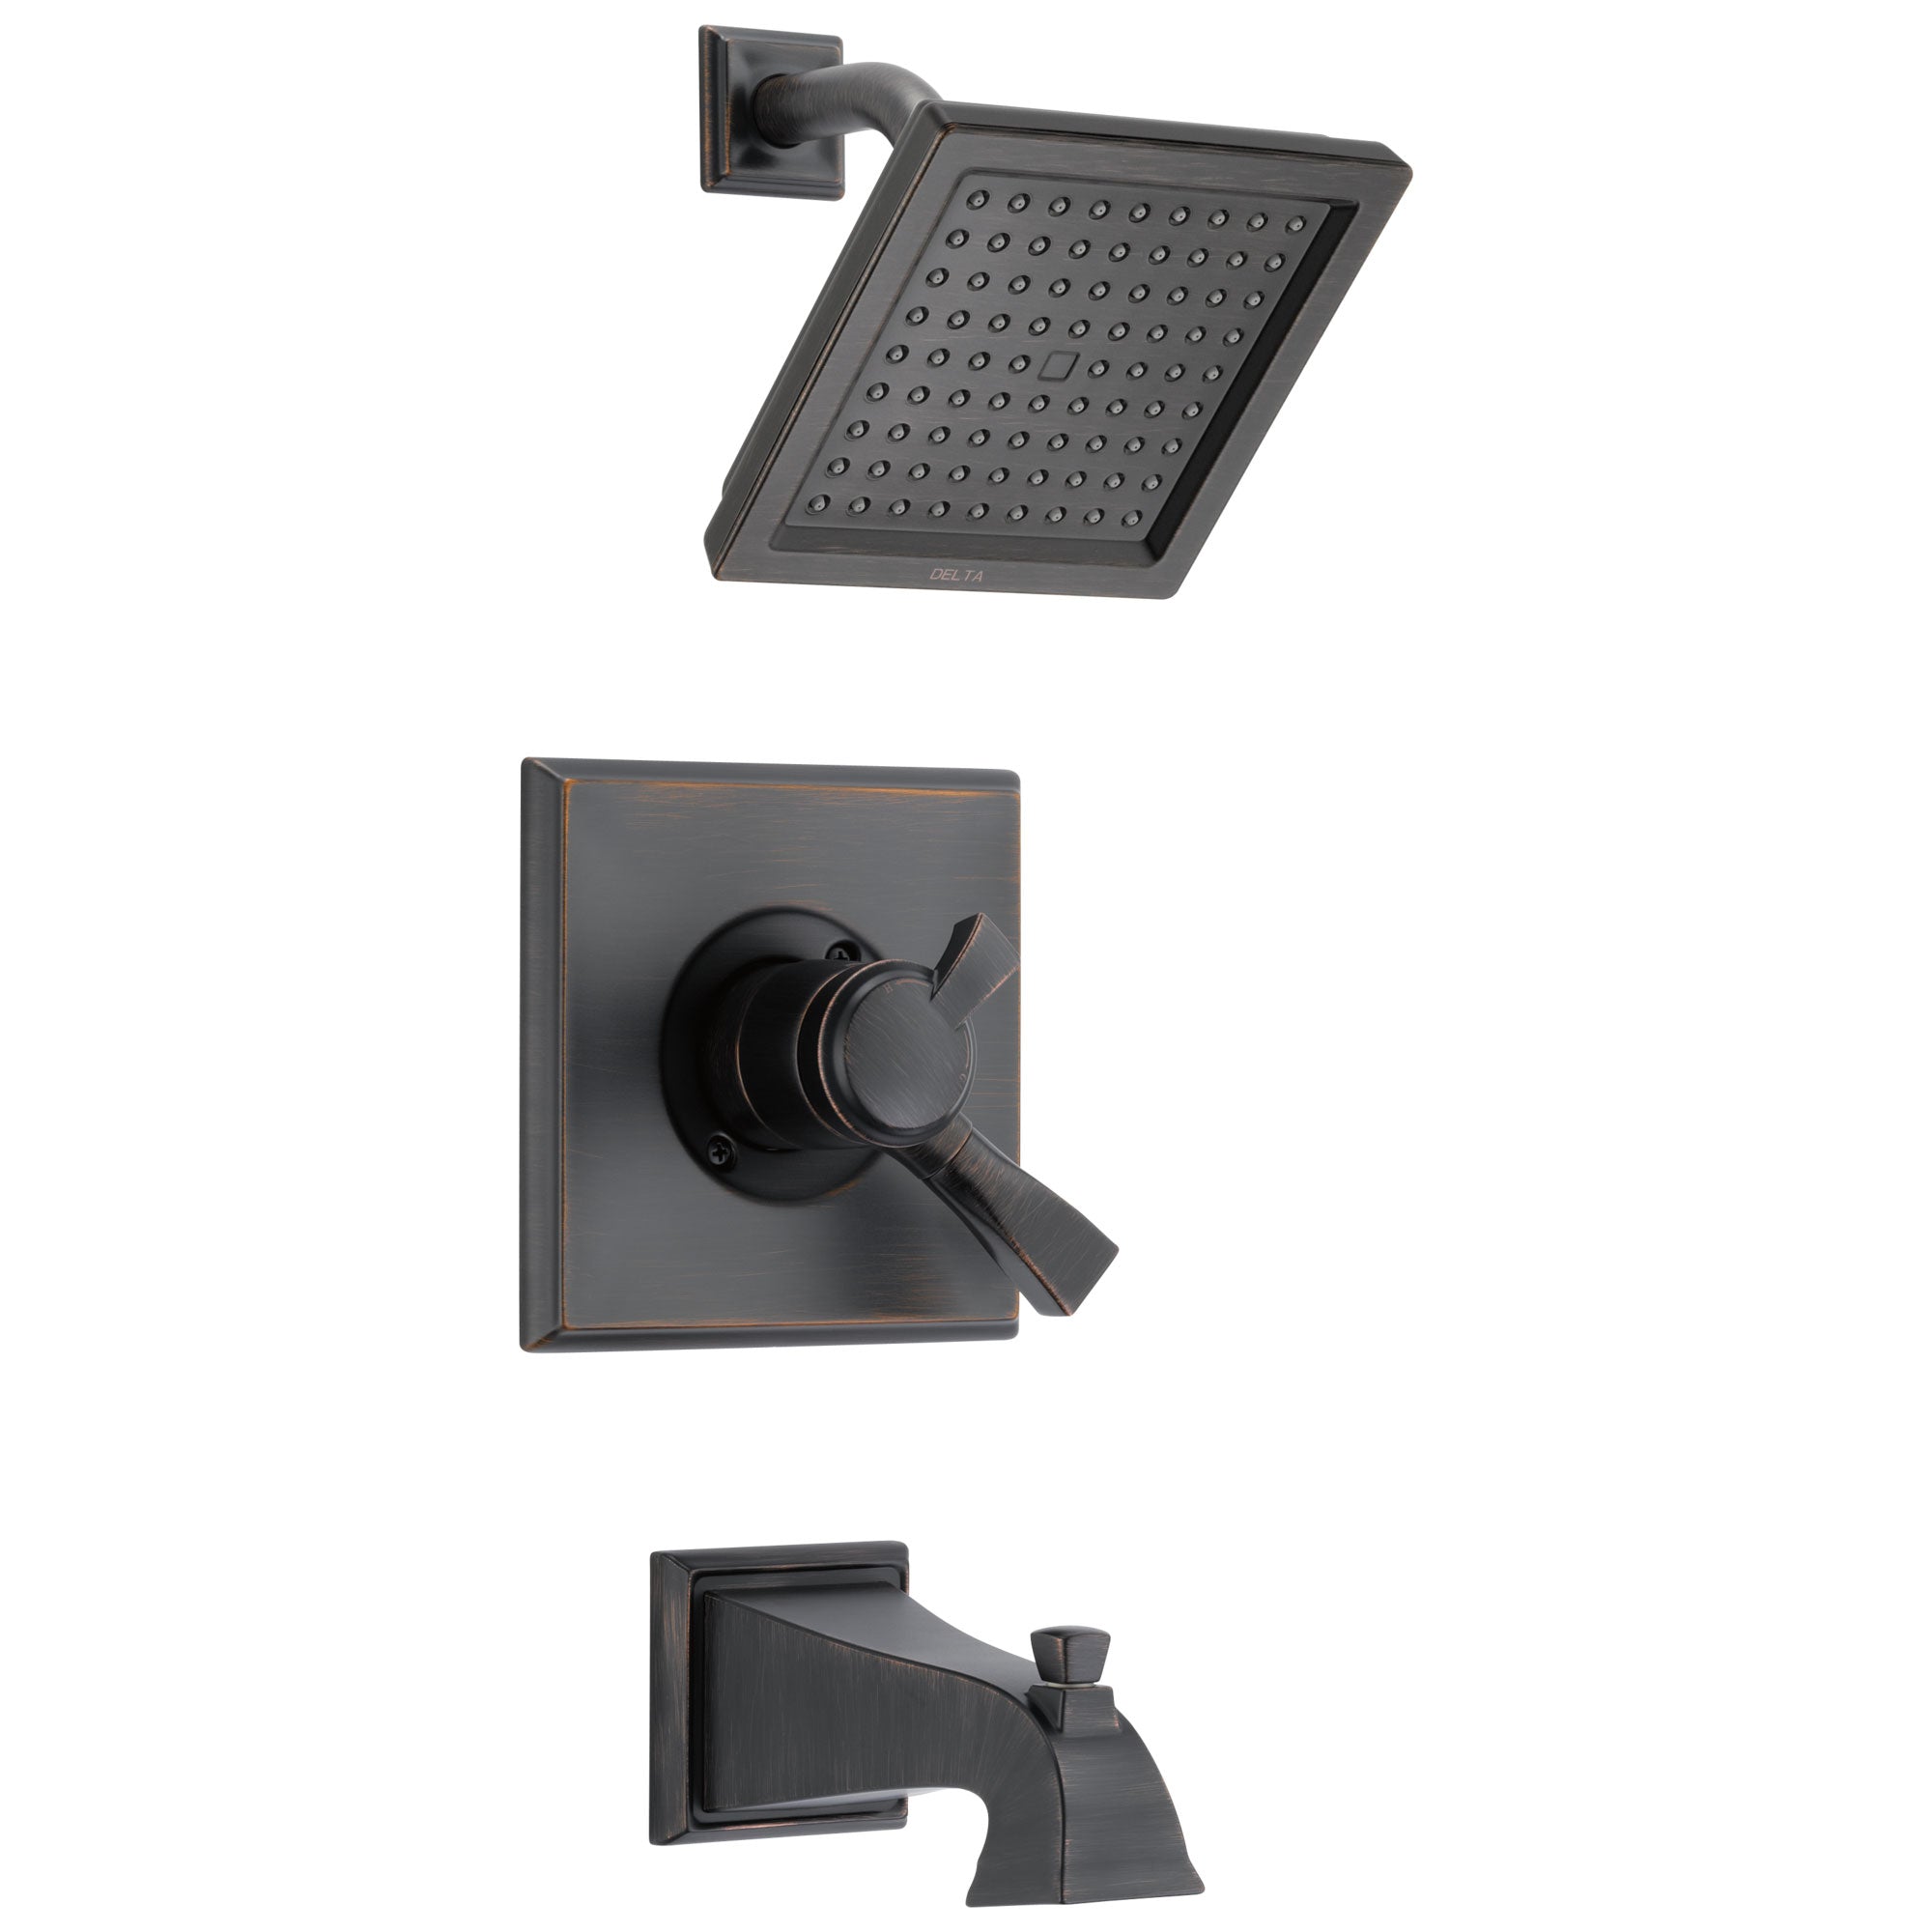 Delta Dryden Collection Venetian Bronze Monitor 17 1.75 GPM Water Efficient Dual Control Tub and Shower Combination Trim (Requires Valve) DT17451RBWE